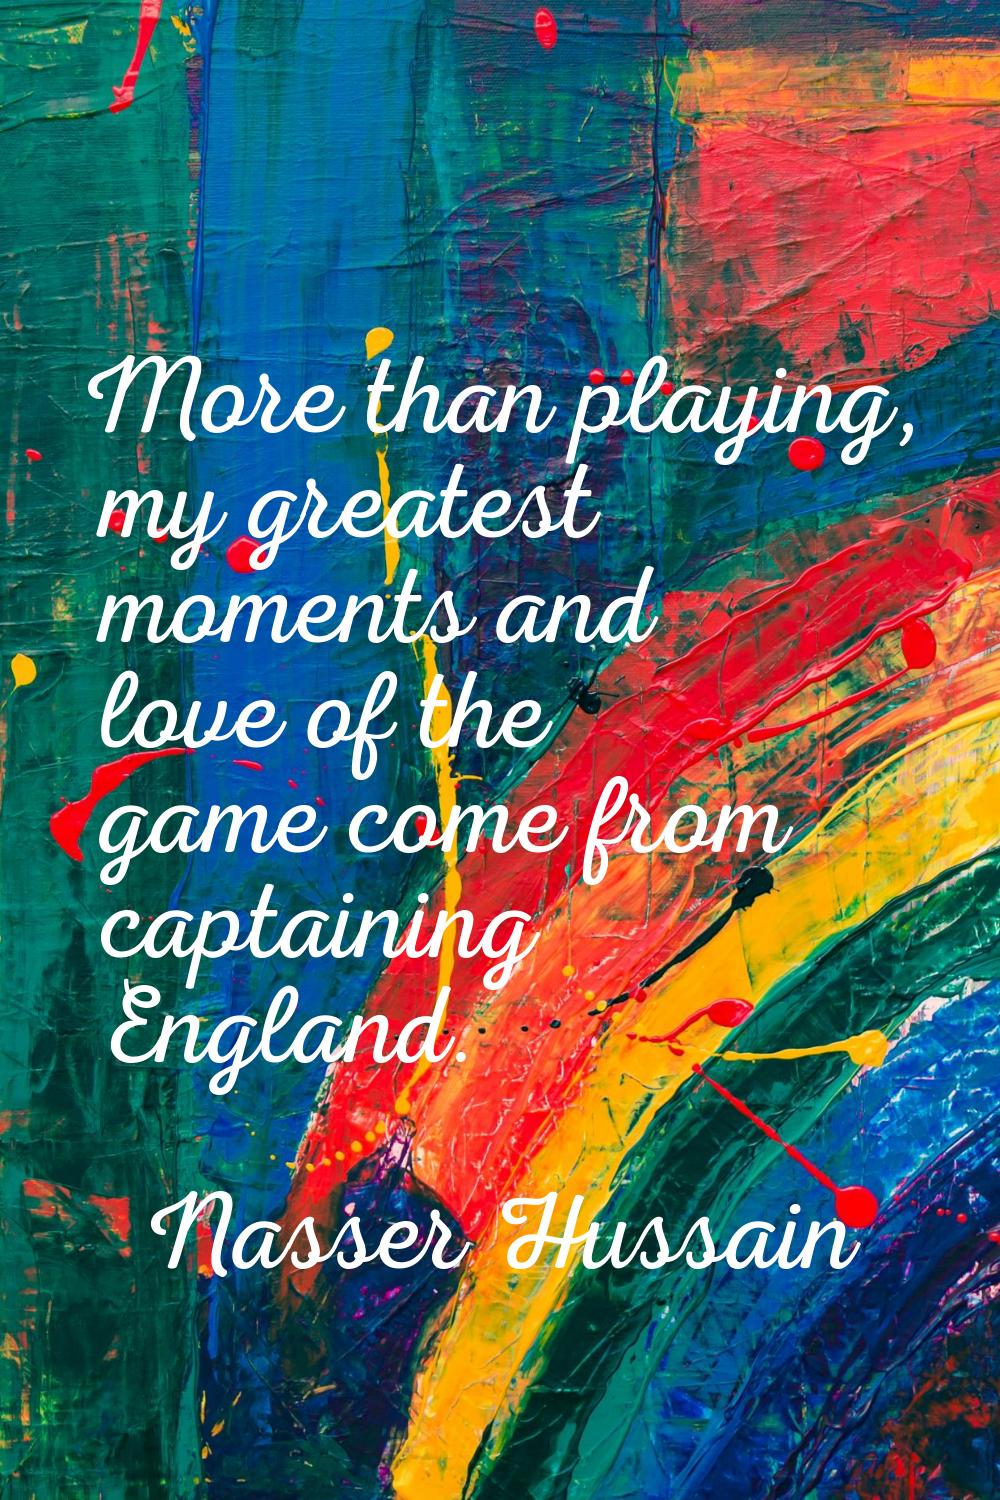 More than playing, my greatest moments and love of the game come from captaining England.